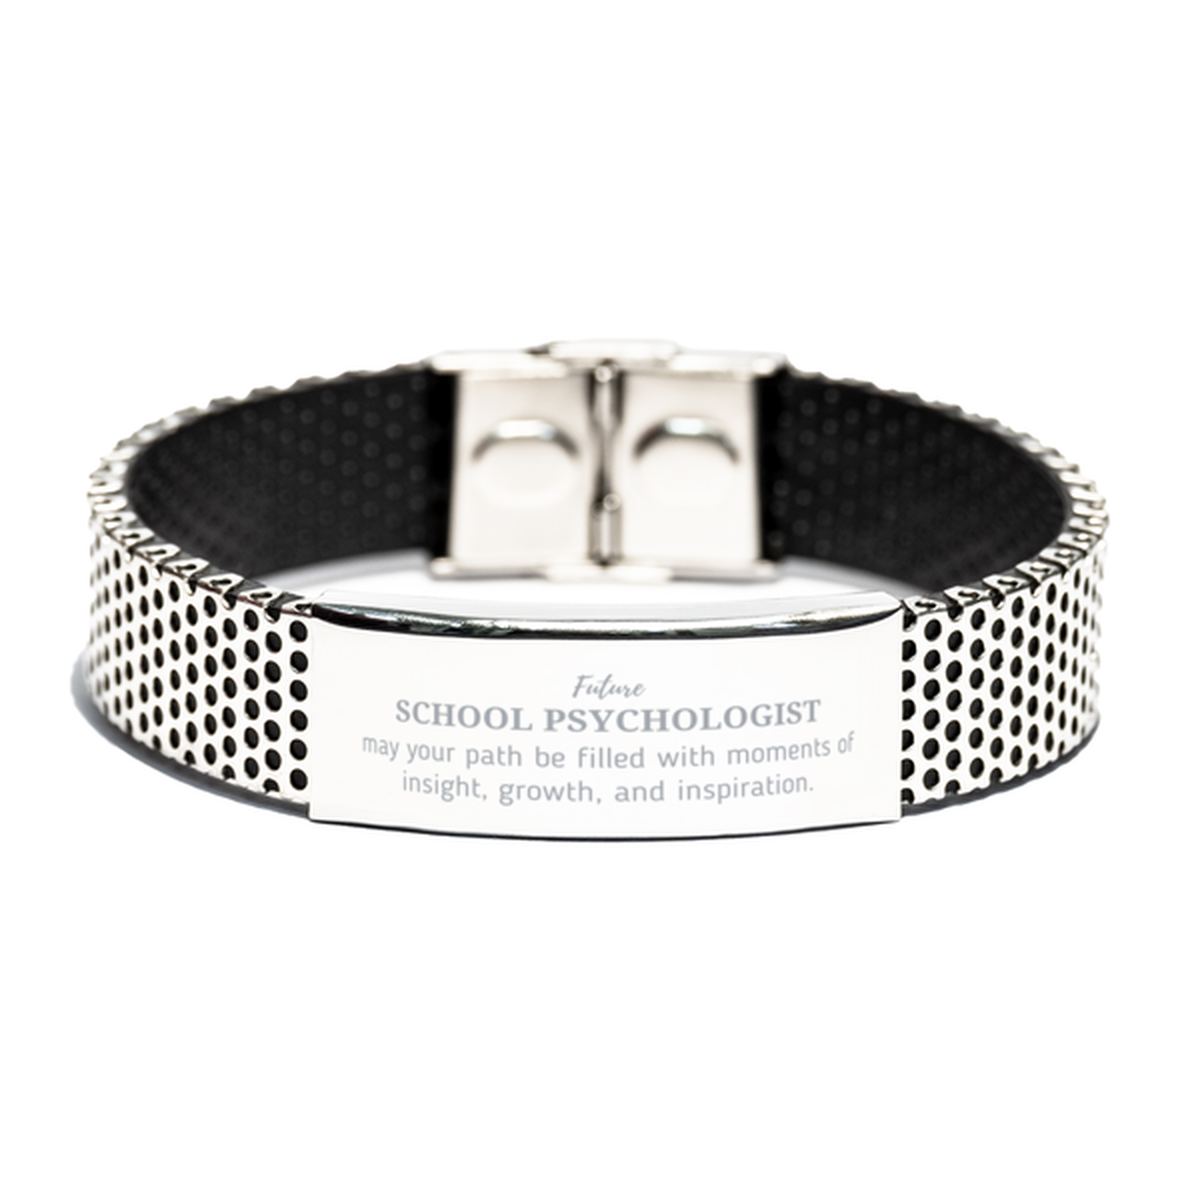 Future School Psychologist Gifts, May your path be filled with moments of insight, Graduation Gifts for New School Psychologist, Christmas Unique Stainless Steel Bracelet For Men, Women, Friends